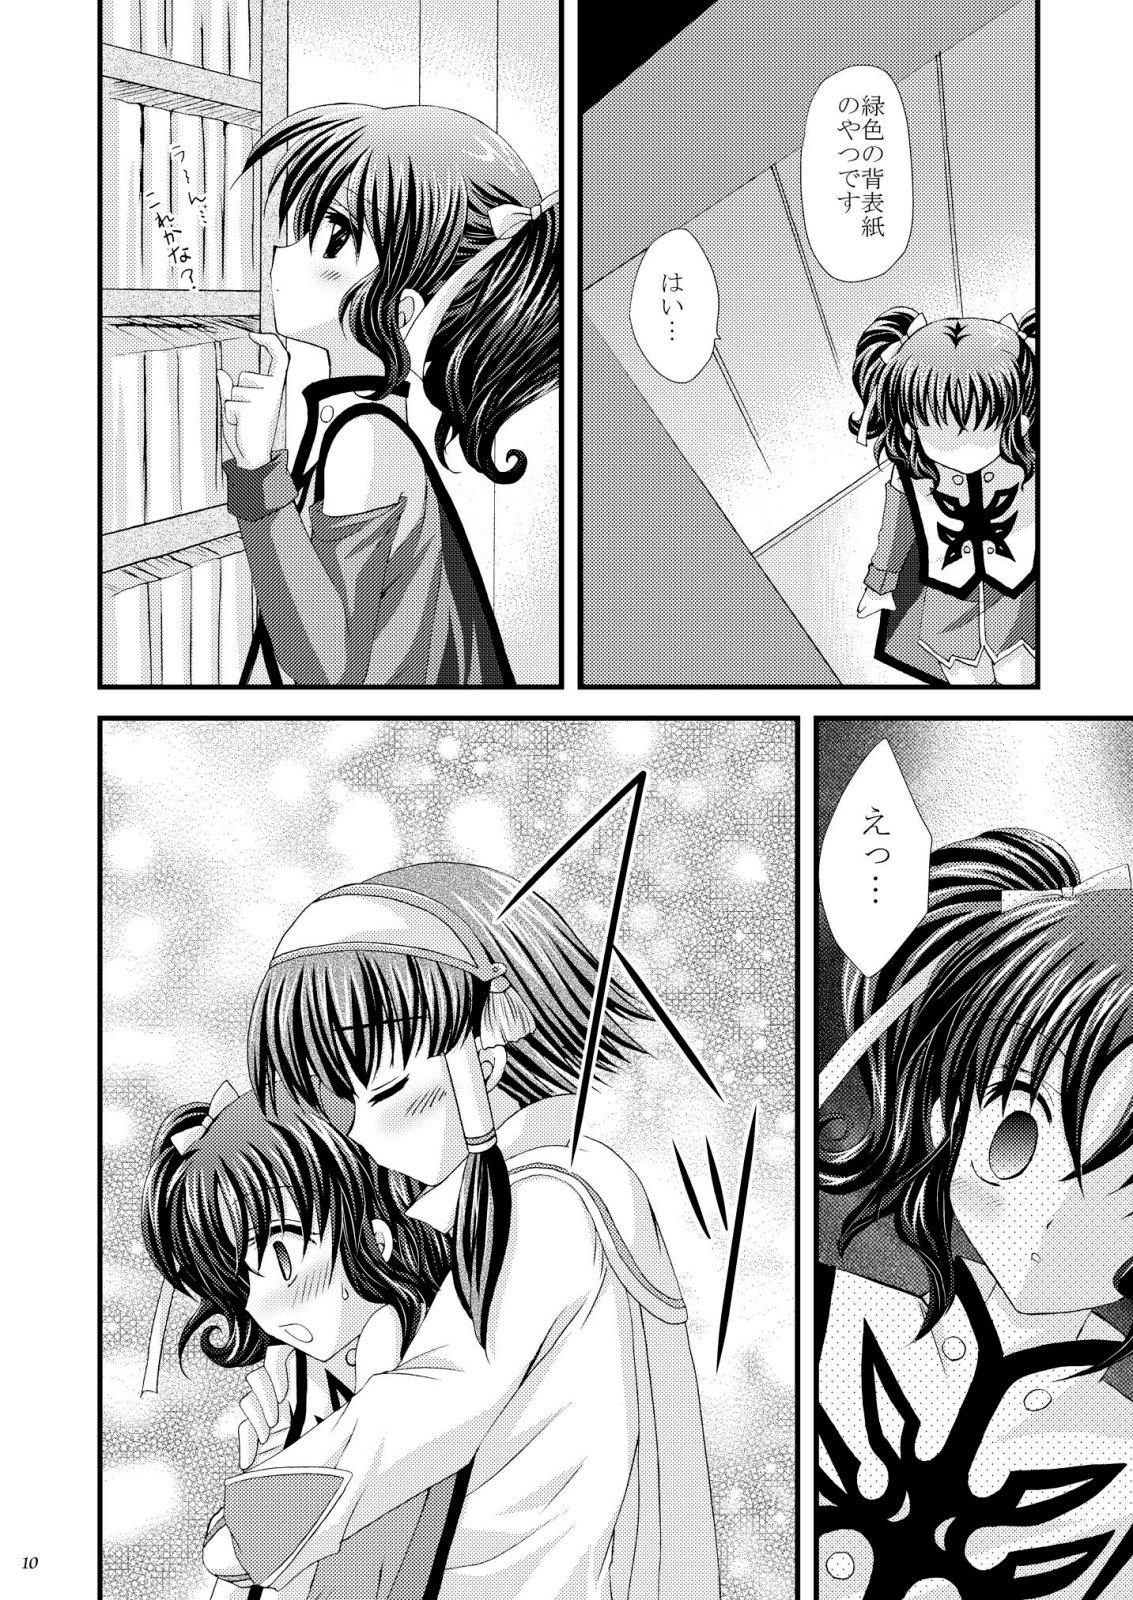 Officesex Never Forget - Tales of the abyss HD - Page 10